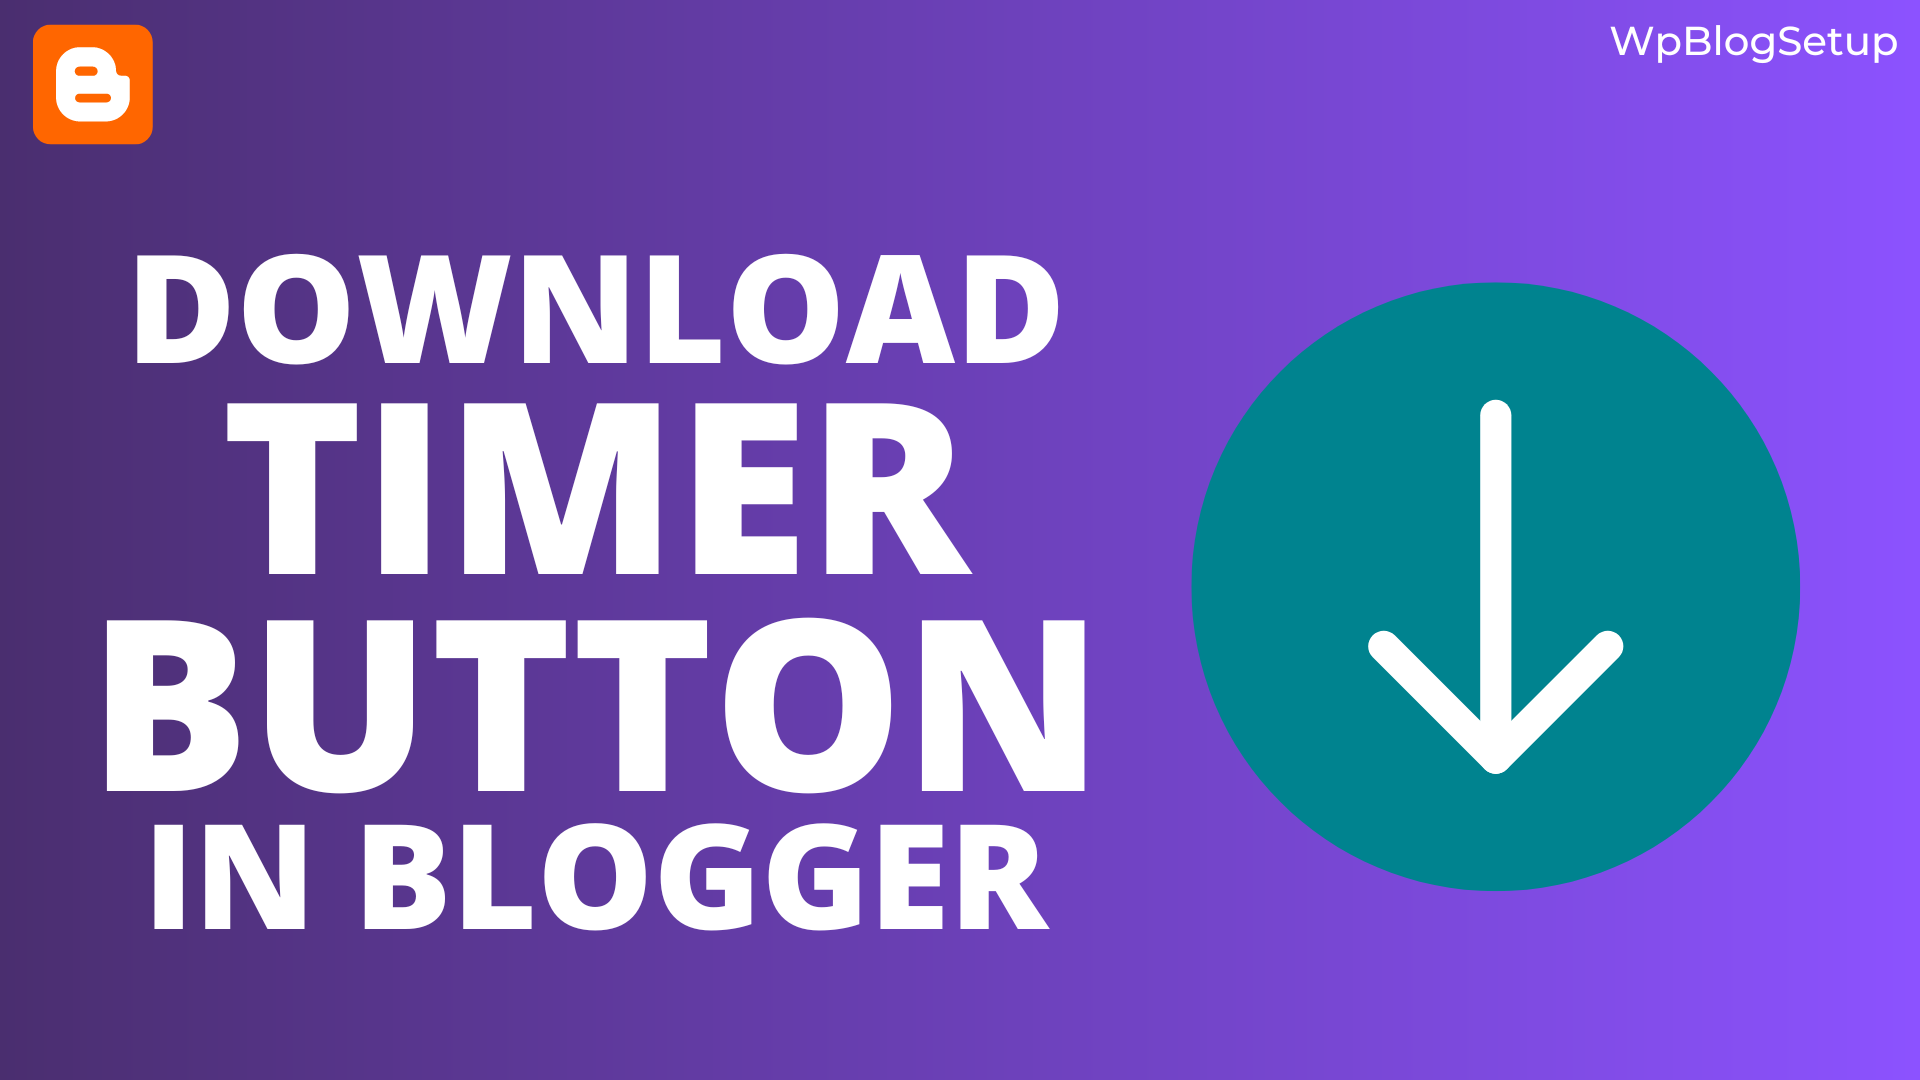 Download timer button in Blogger